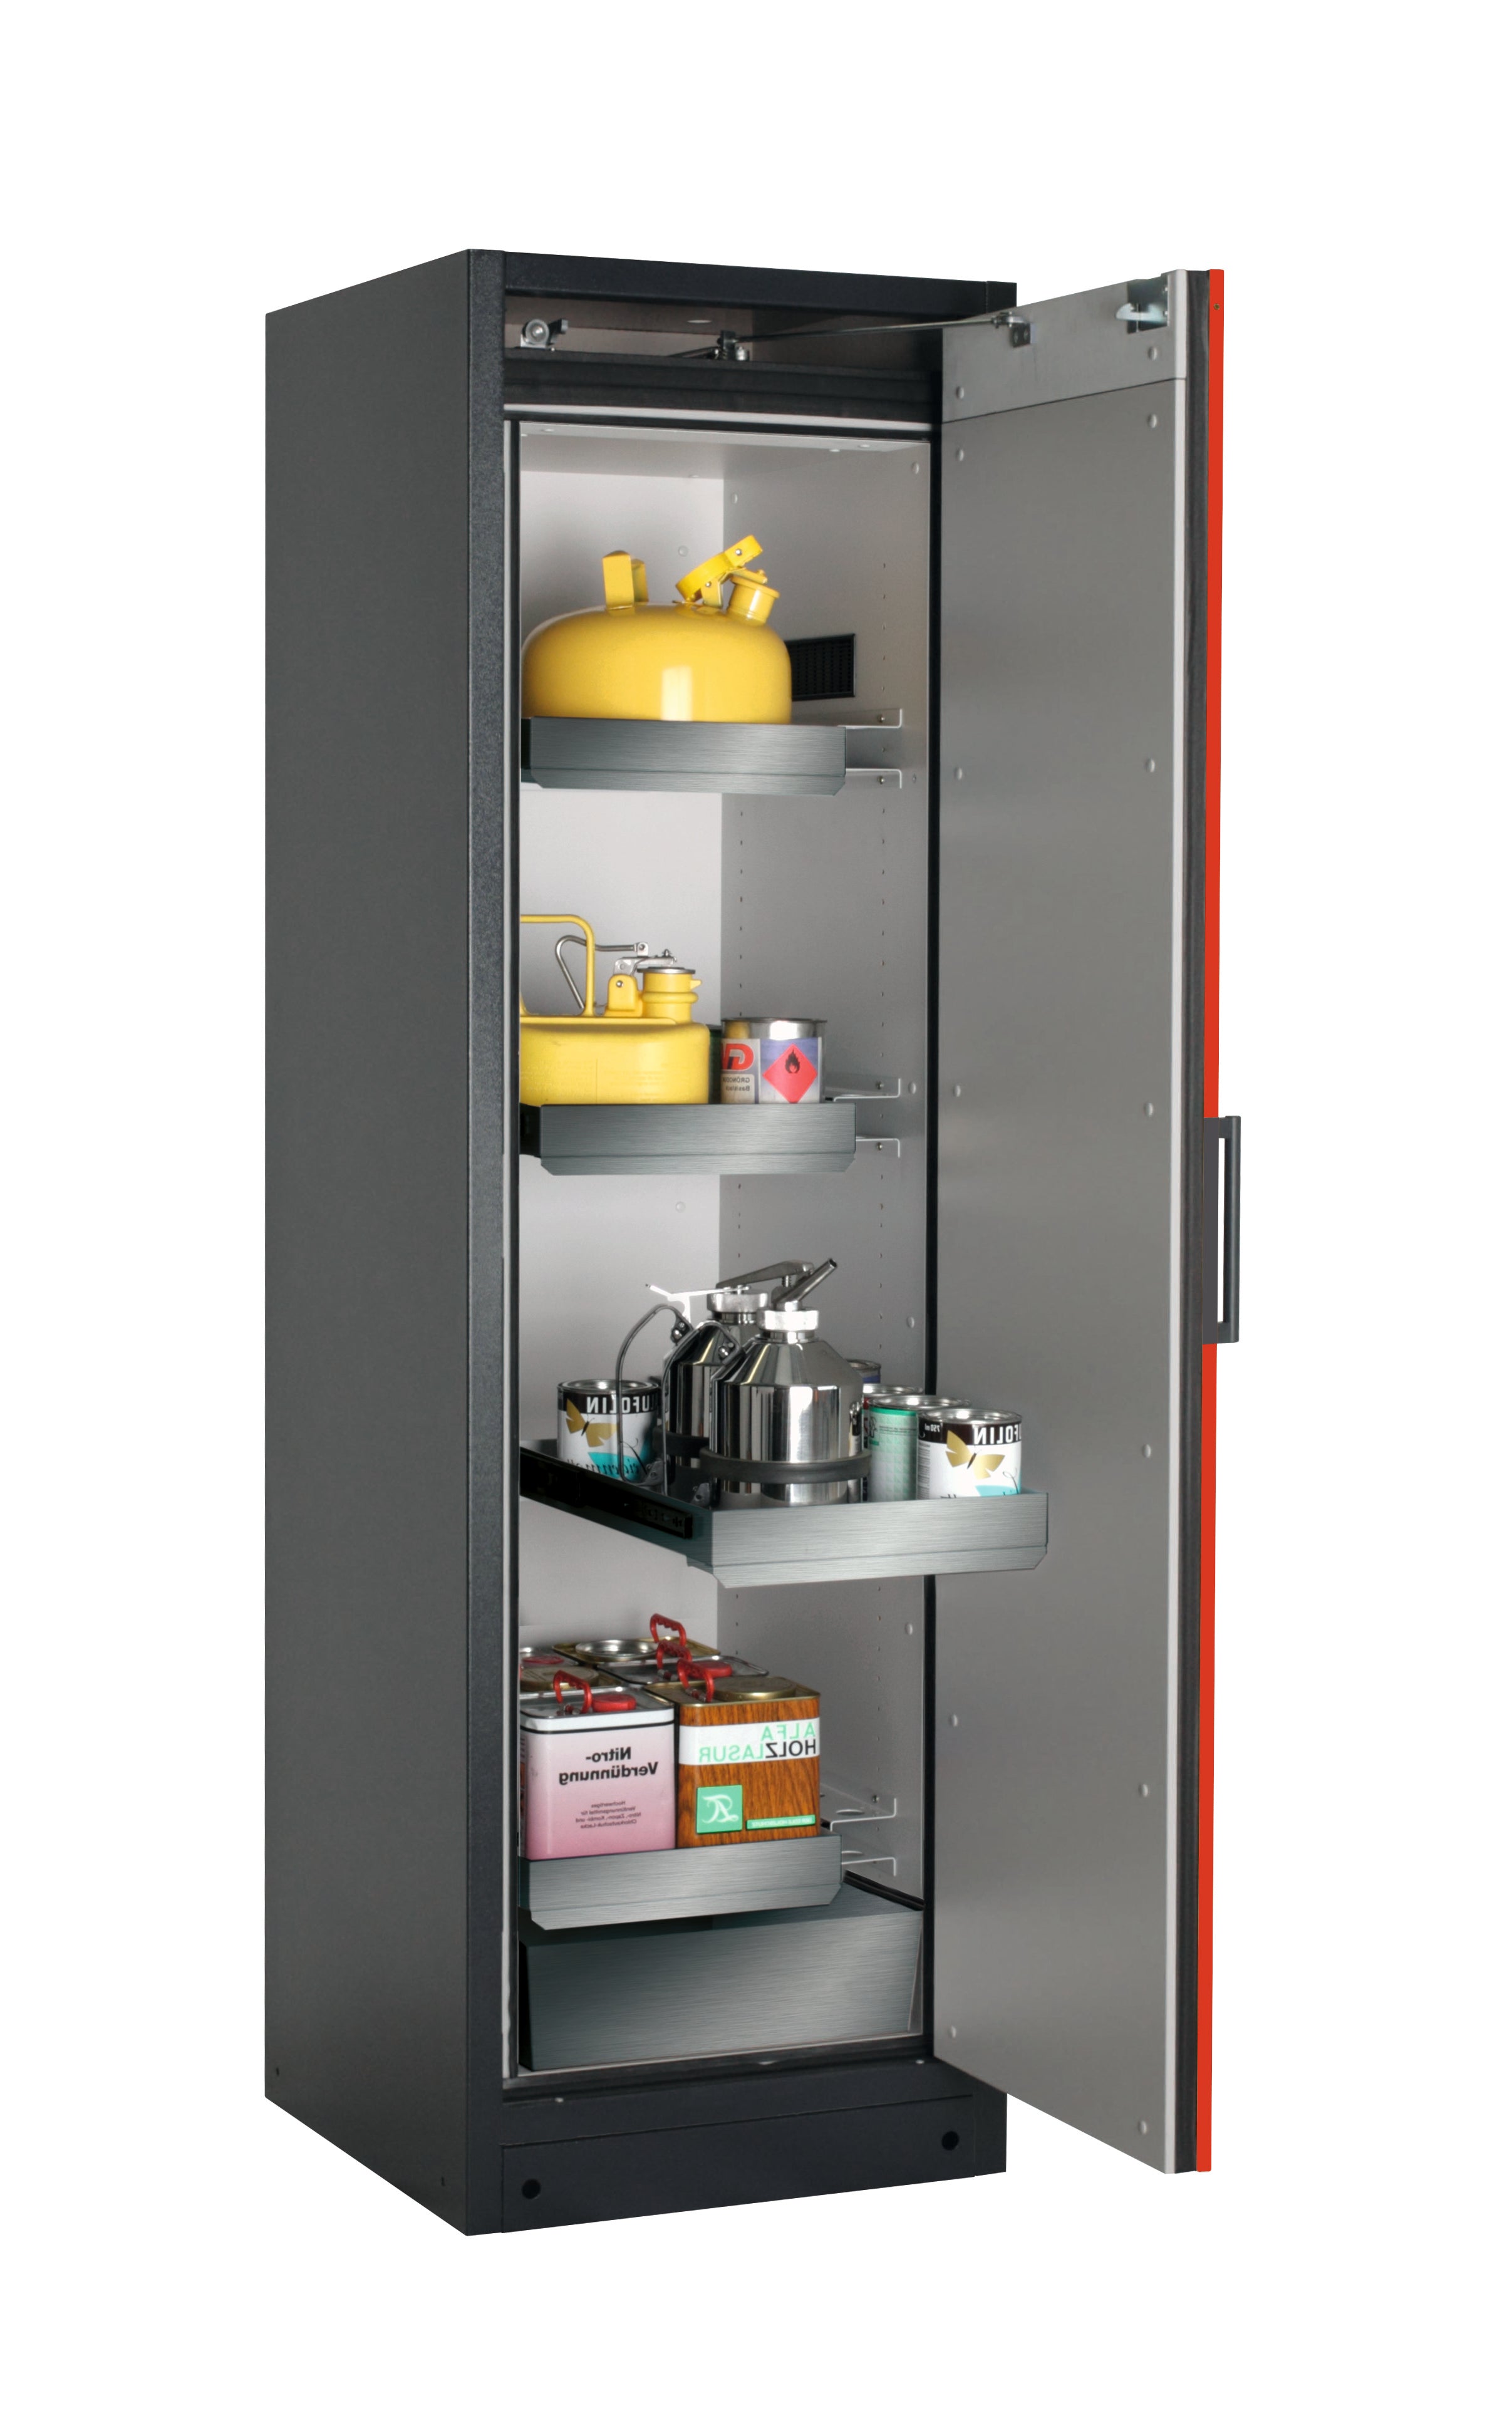 Type 90 safety storage cabinet Q-CLASSIC-90 model Q90.195.060.R in traffic red RAL 3020 with 3x drawer (standard) (stainless steel 1.4301),